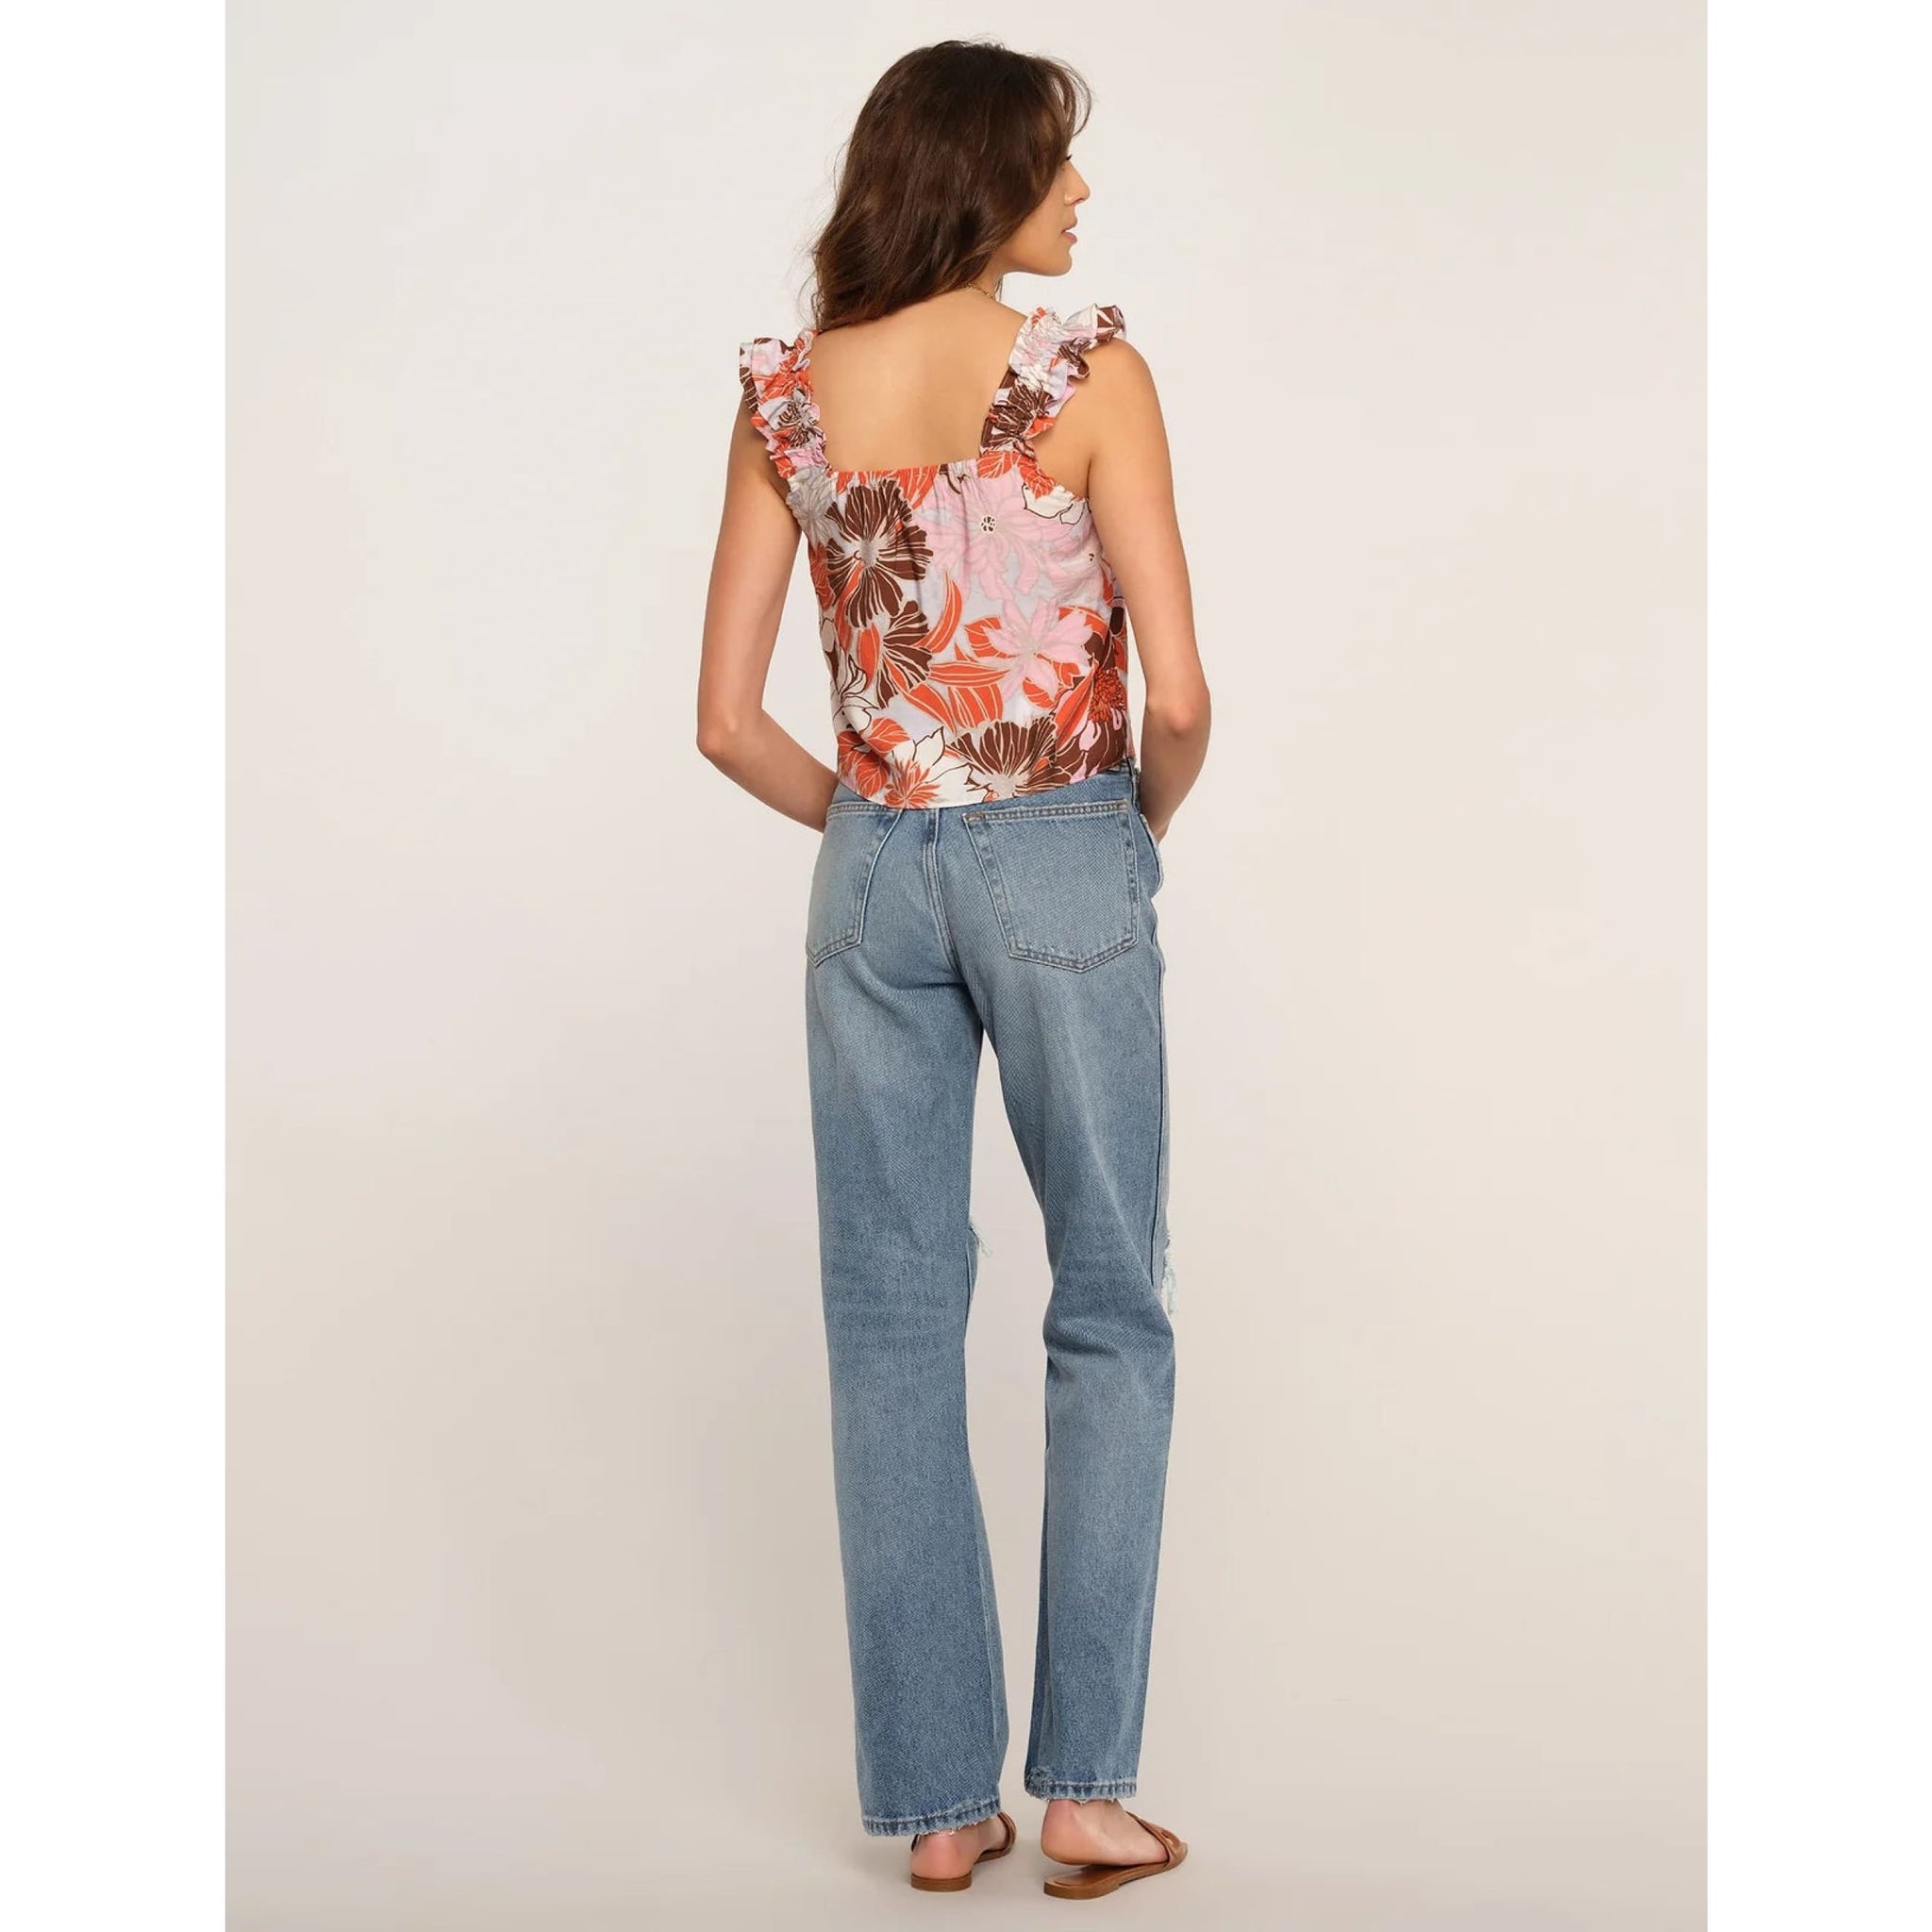 The Sienna Top is a go-to for casual and easy days. It has a relaxed fit and ruffled straps. Pair it with cut-offs for a perfect spring-to-summer look.